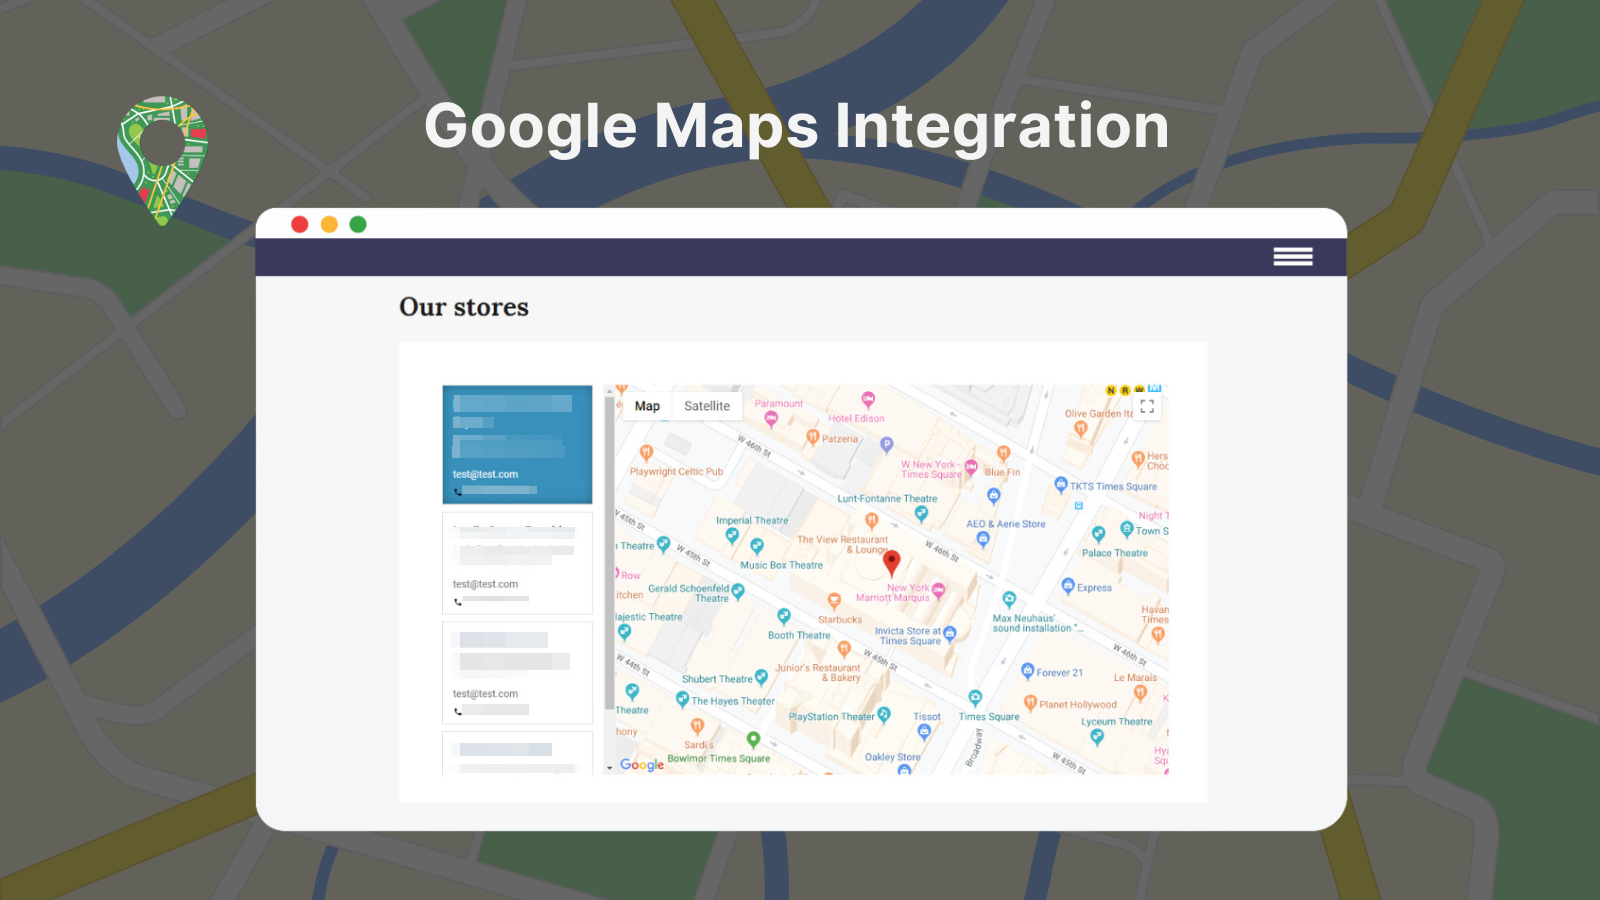 Google maps integration with pins & information popups